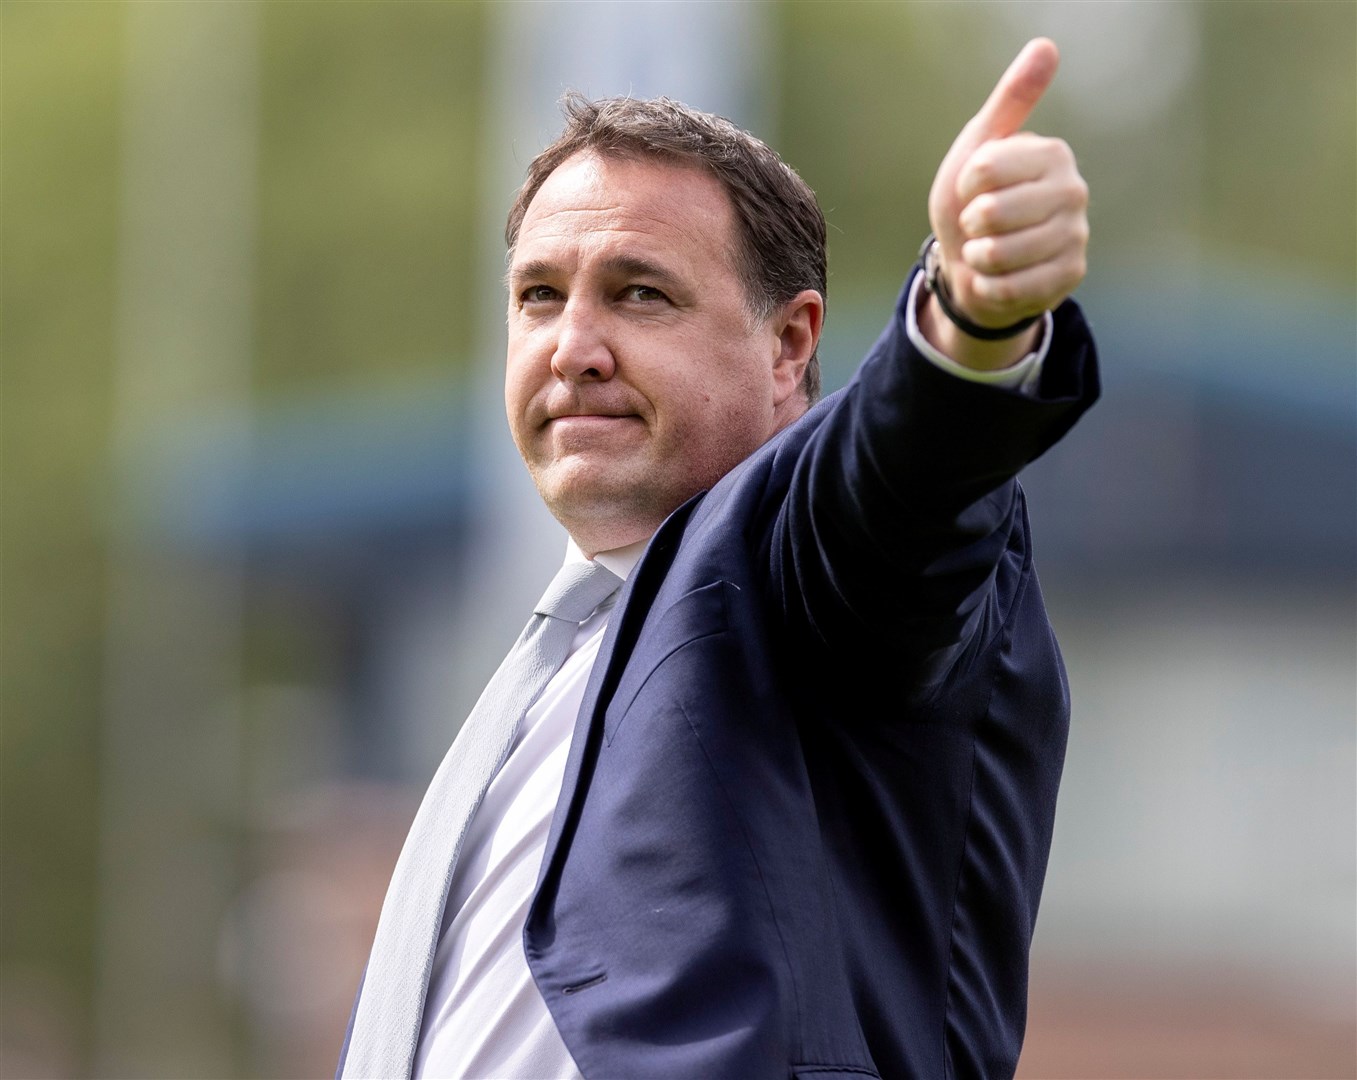 Malky Mackay led the club to a top-six finish in his first season as County boss. Picture: Ken Macpherson